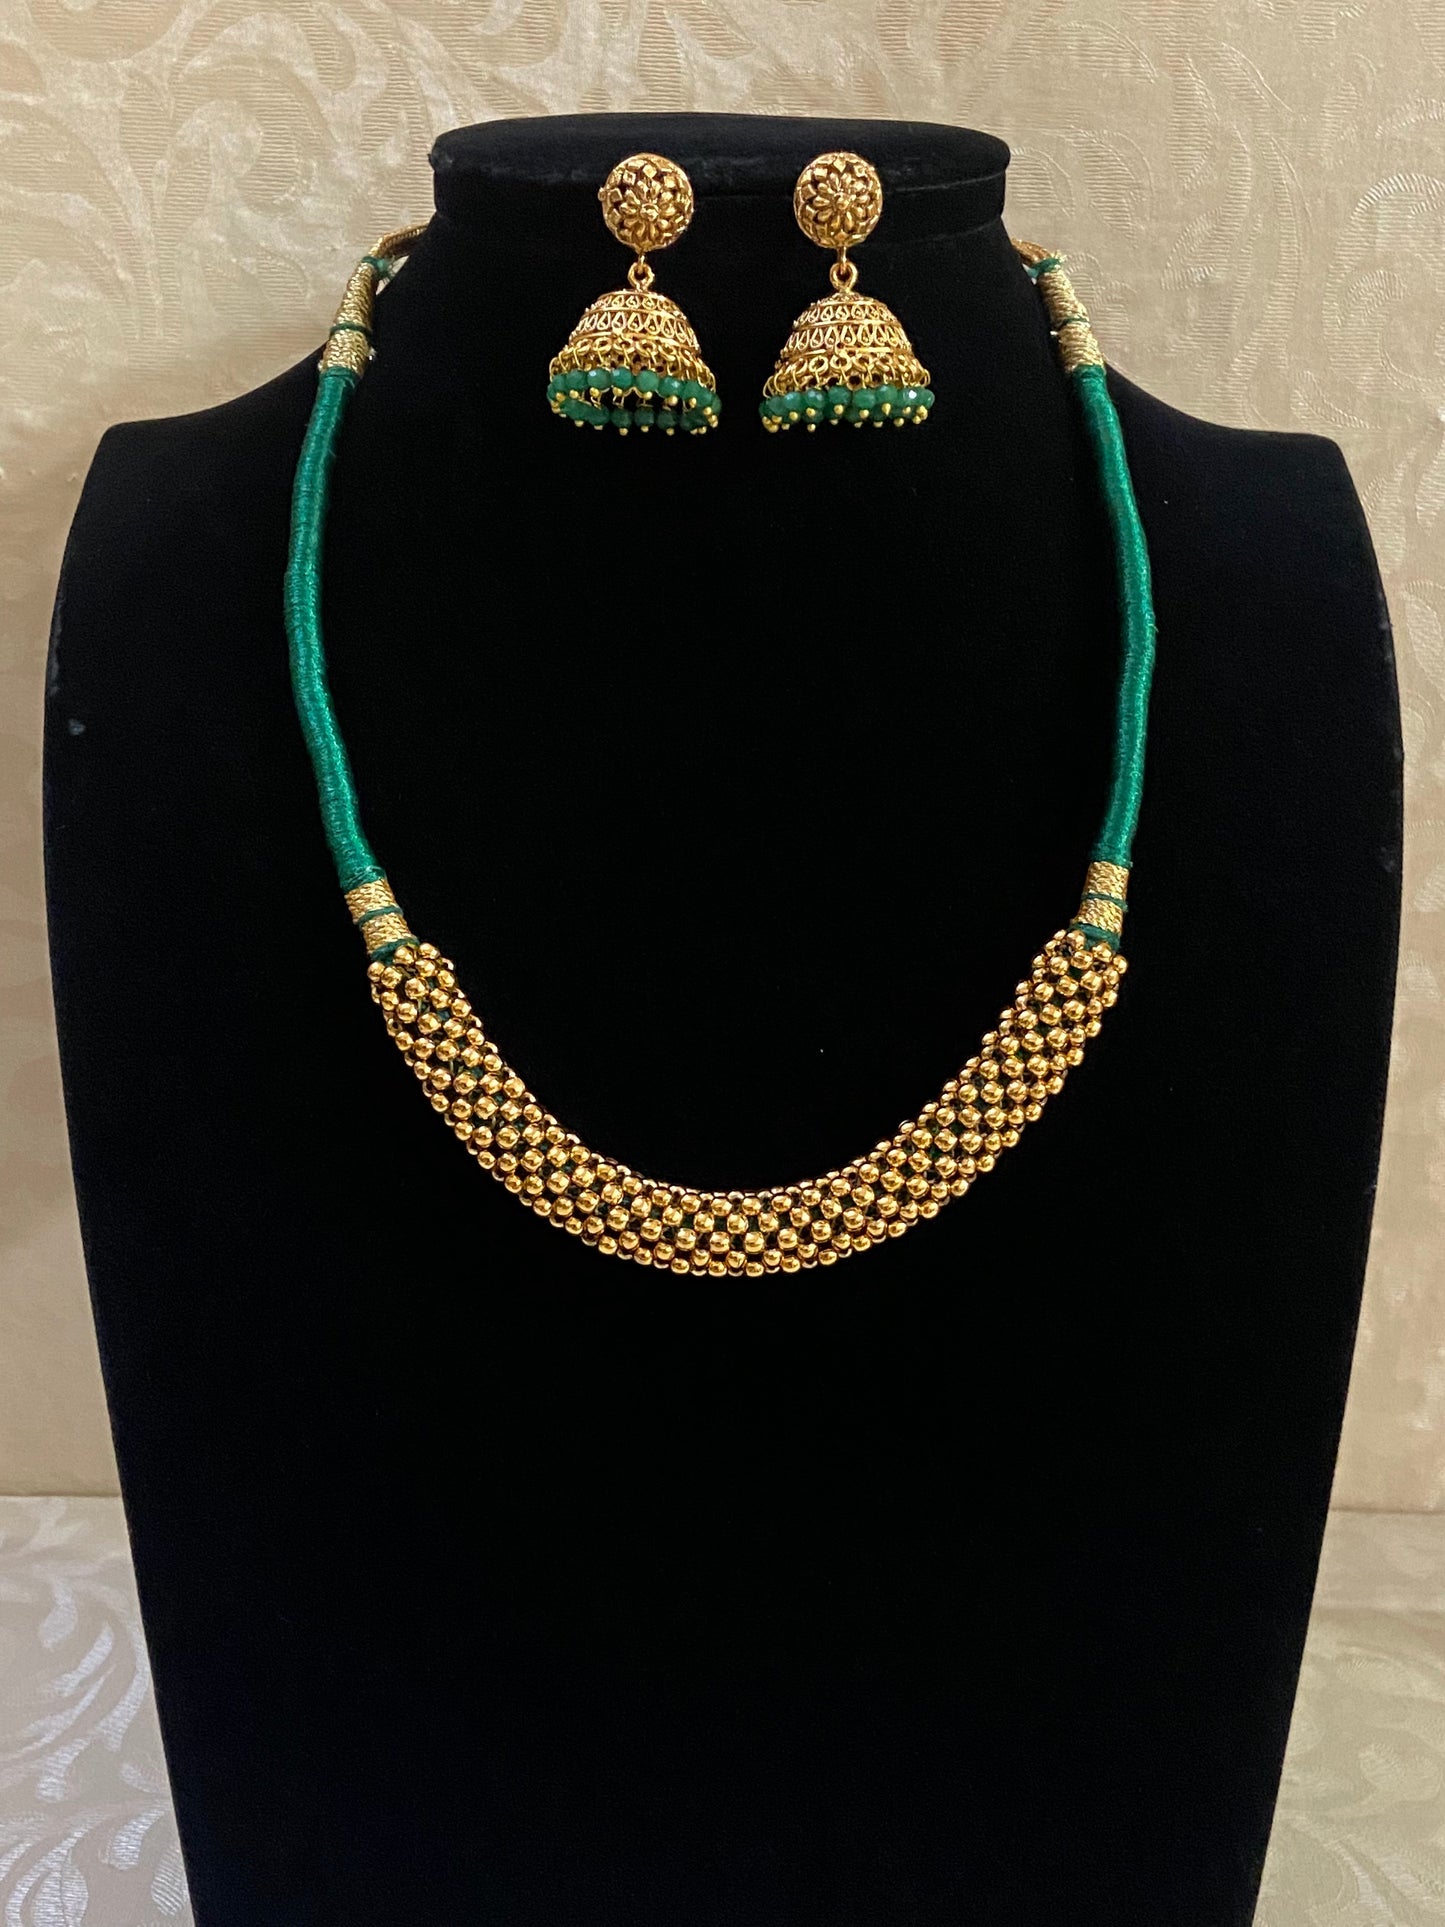 Thread necklace with earrings | stiff necklace | short necklace